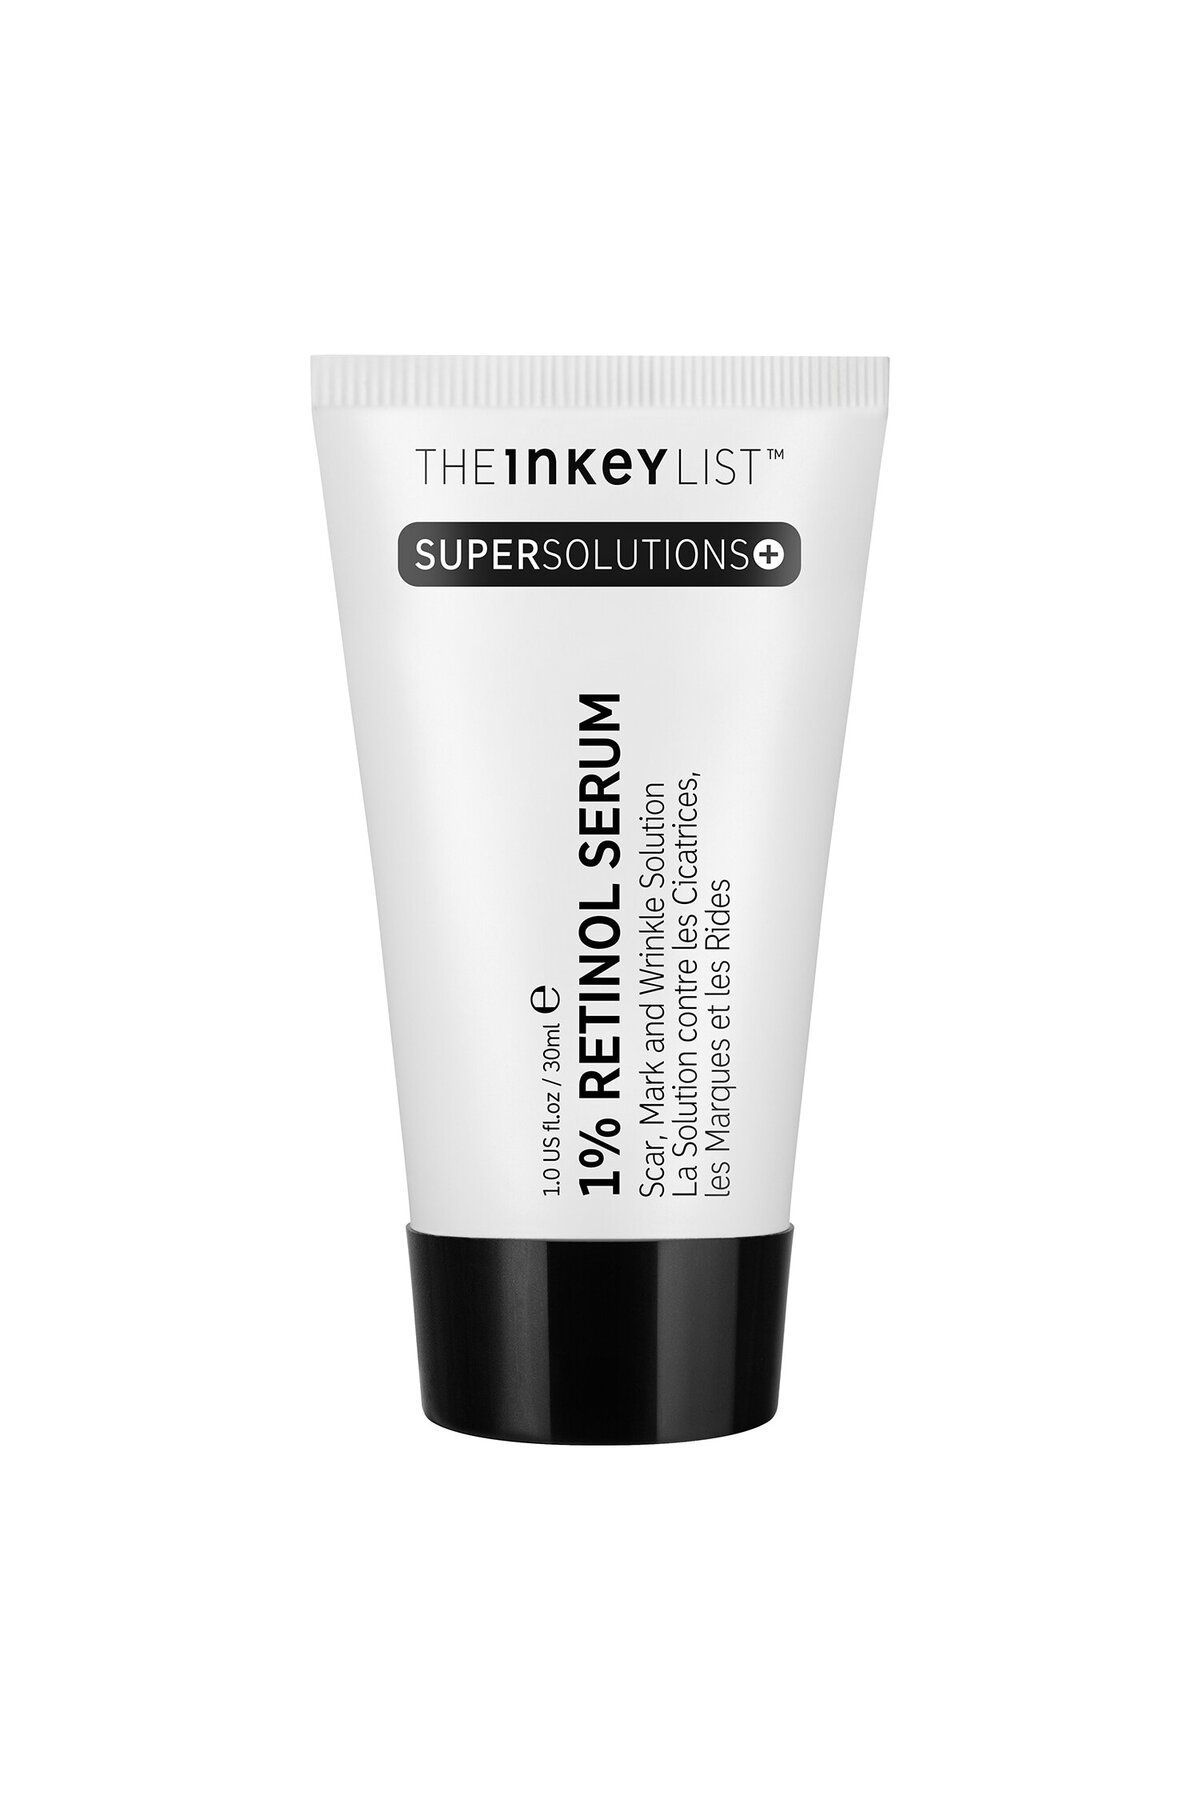 THE INKEY LIST Scar, Mark And Wrinkle Solution With 1% Retinol - Face Serum 30 Ml